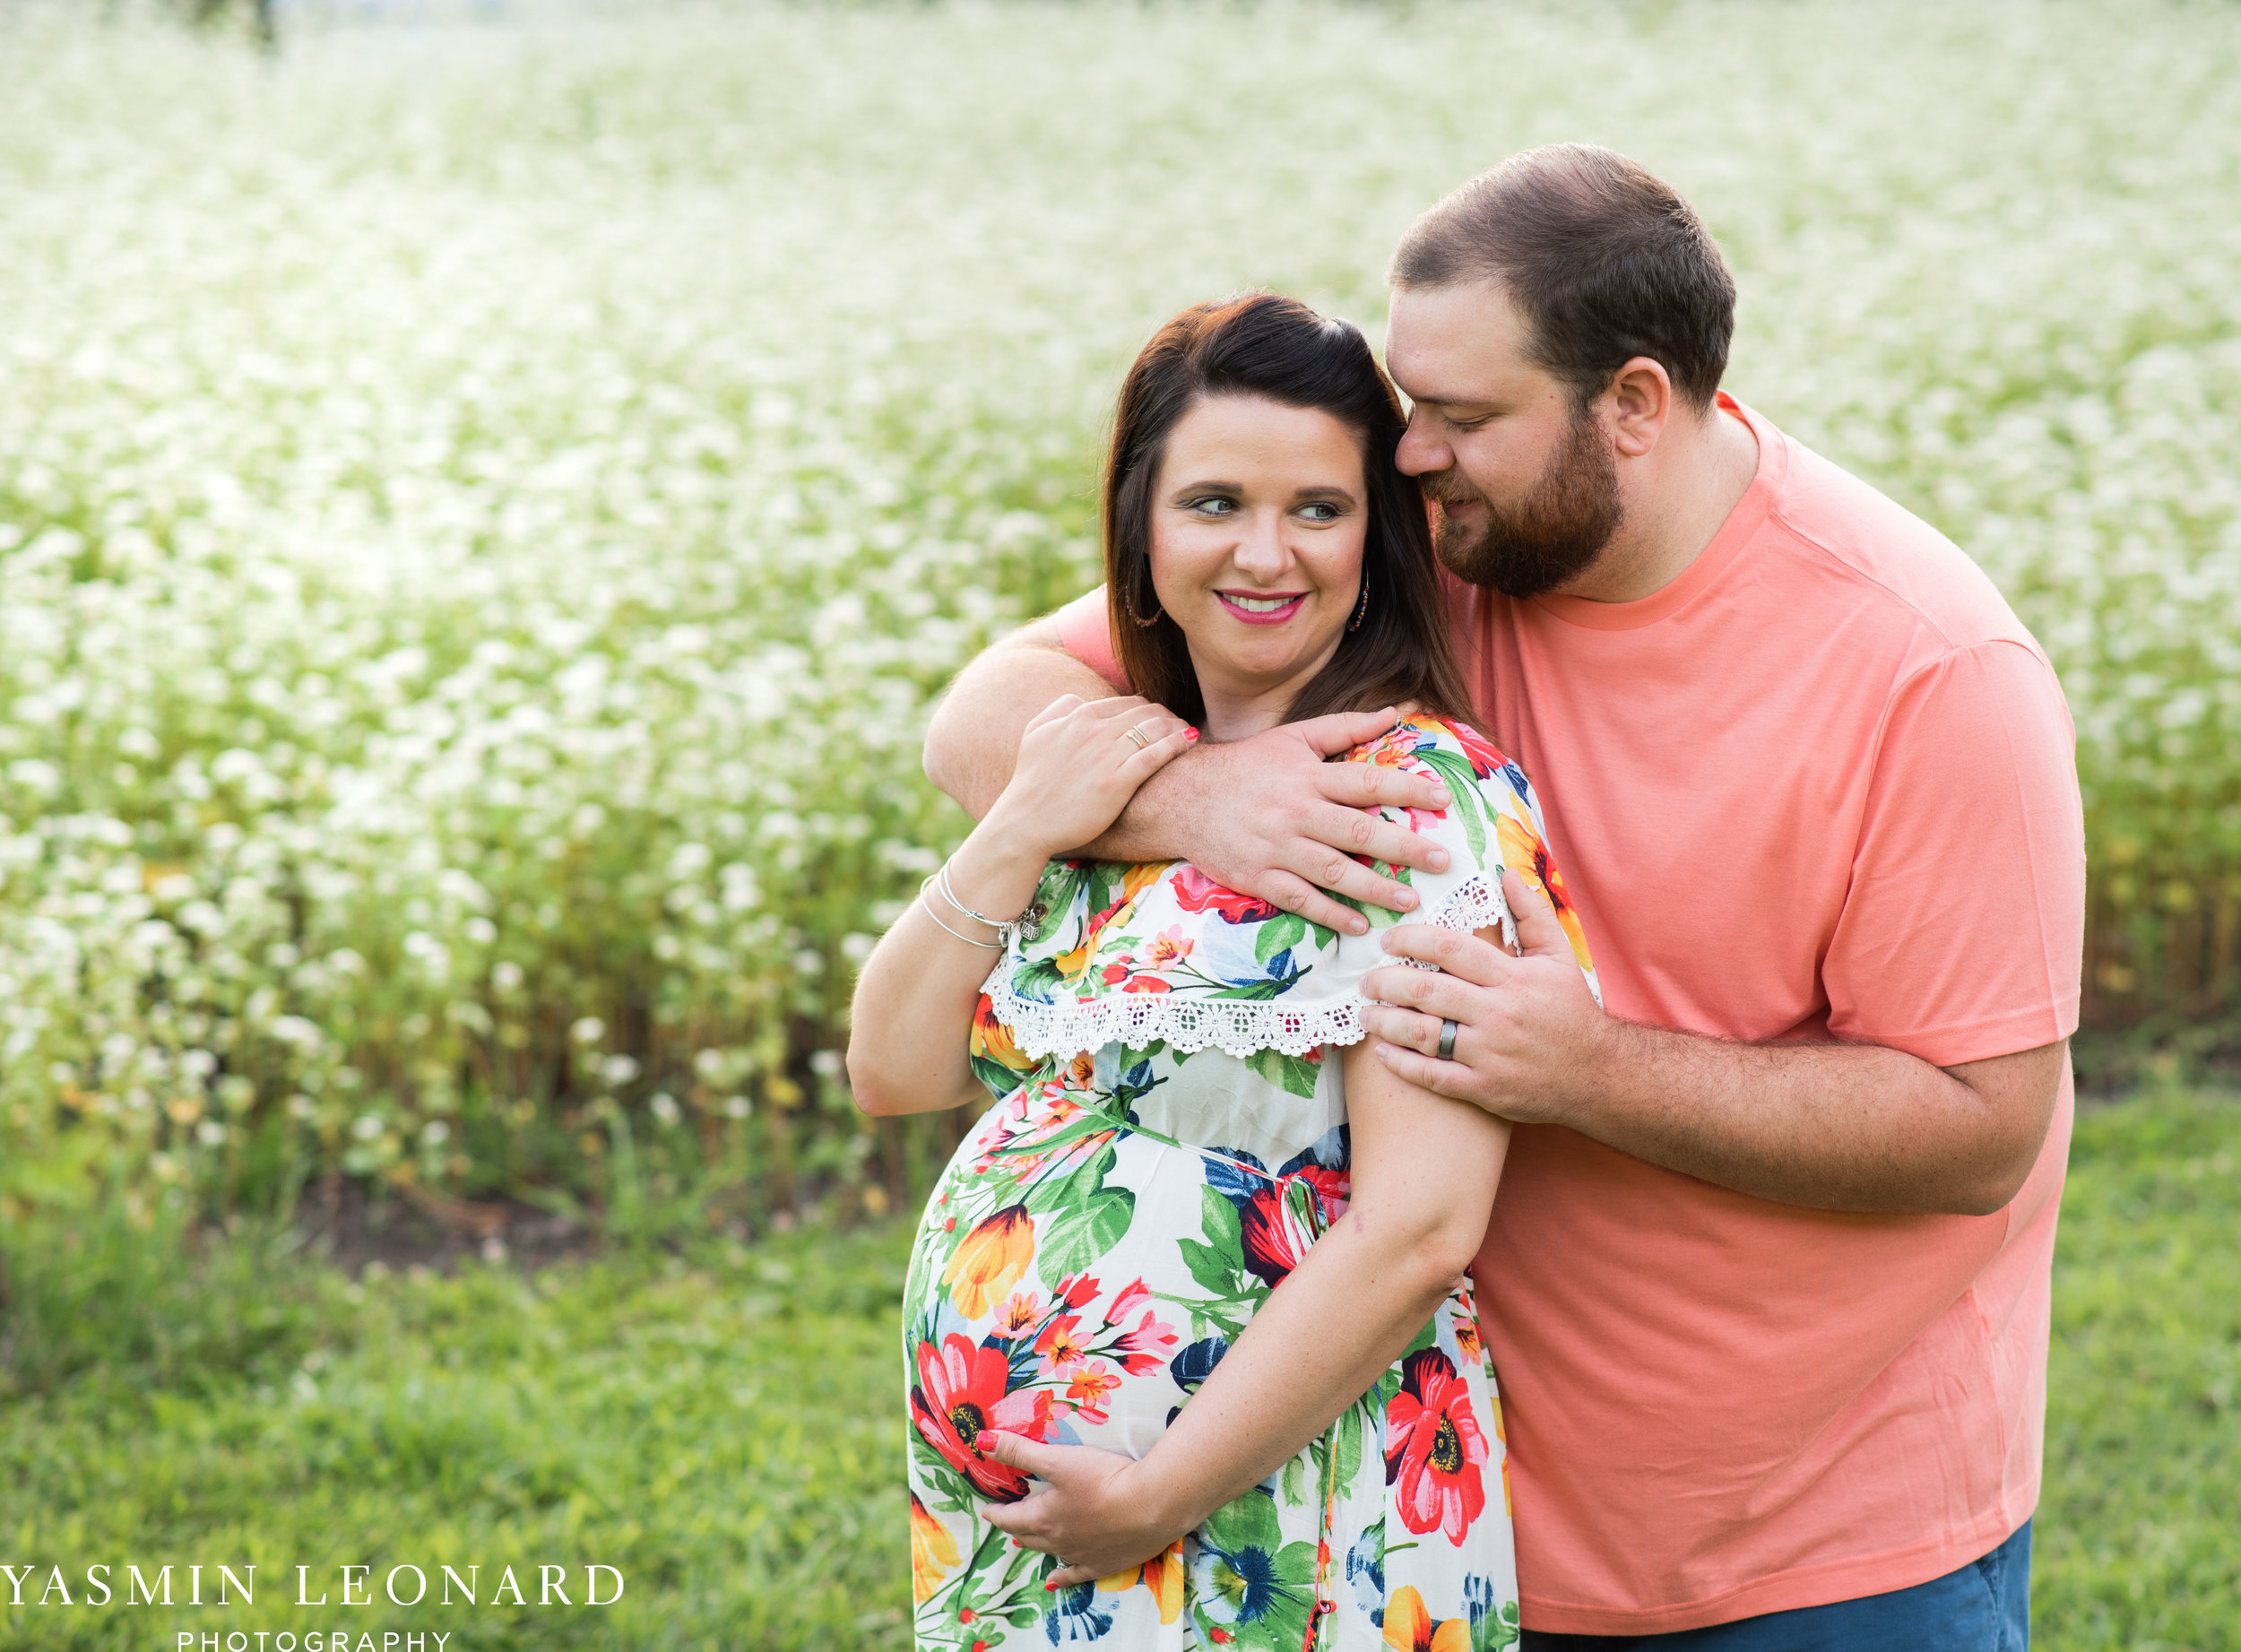 Maternity Session - Summer Maternity Session - Maternity Ideas - High Point Photographer - NC Photographer - What to wear Maternity Session-4.jpg